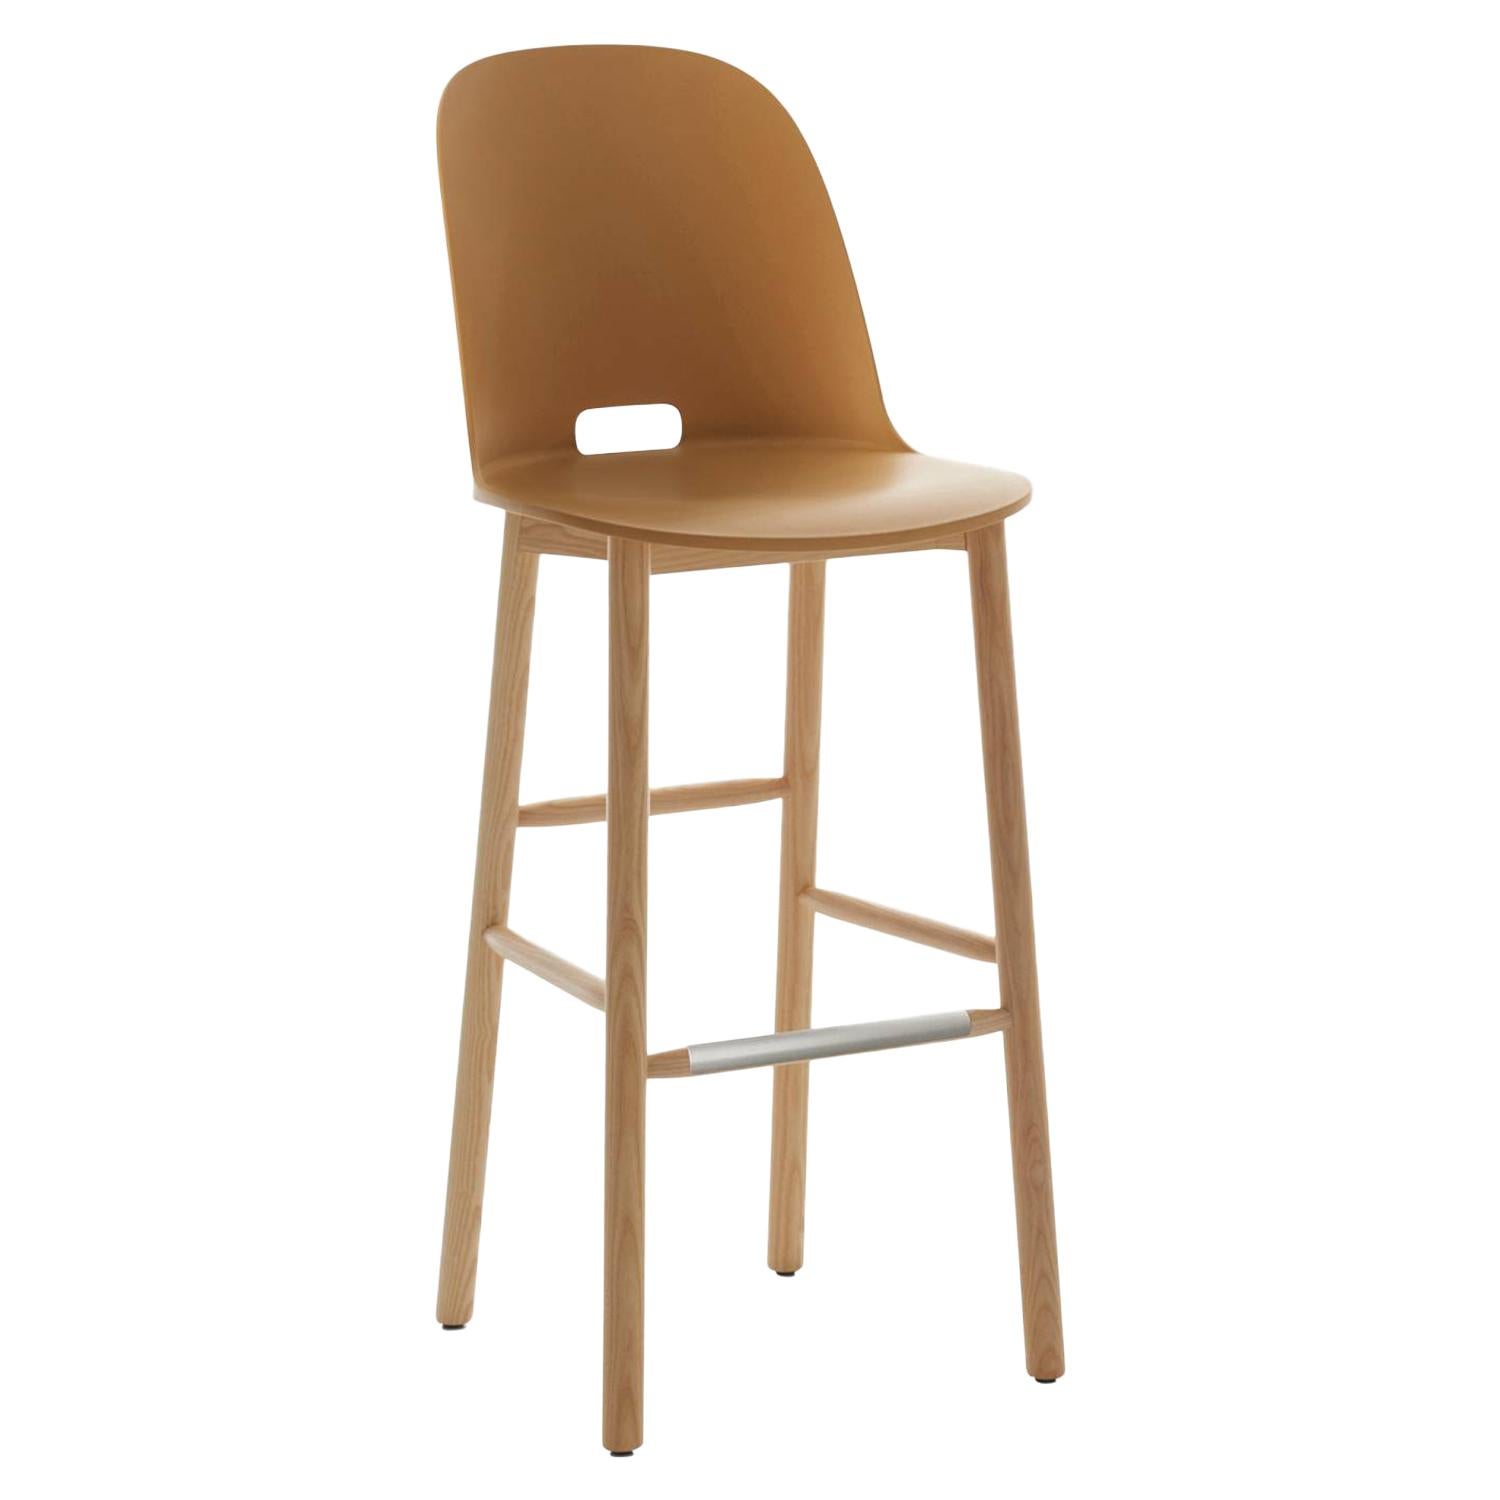 Emeco Alfi Barstool in Sand and Ash with High Back by Jasper Morrison